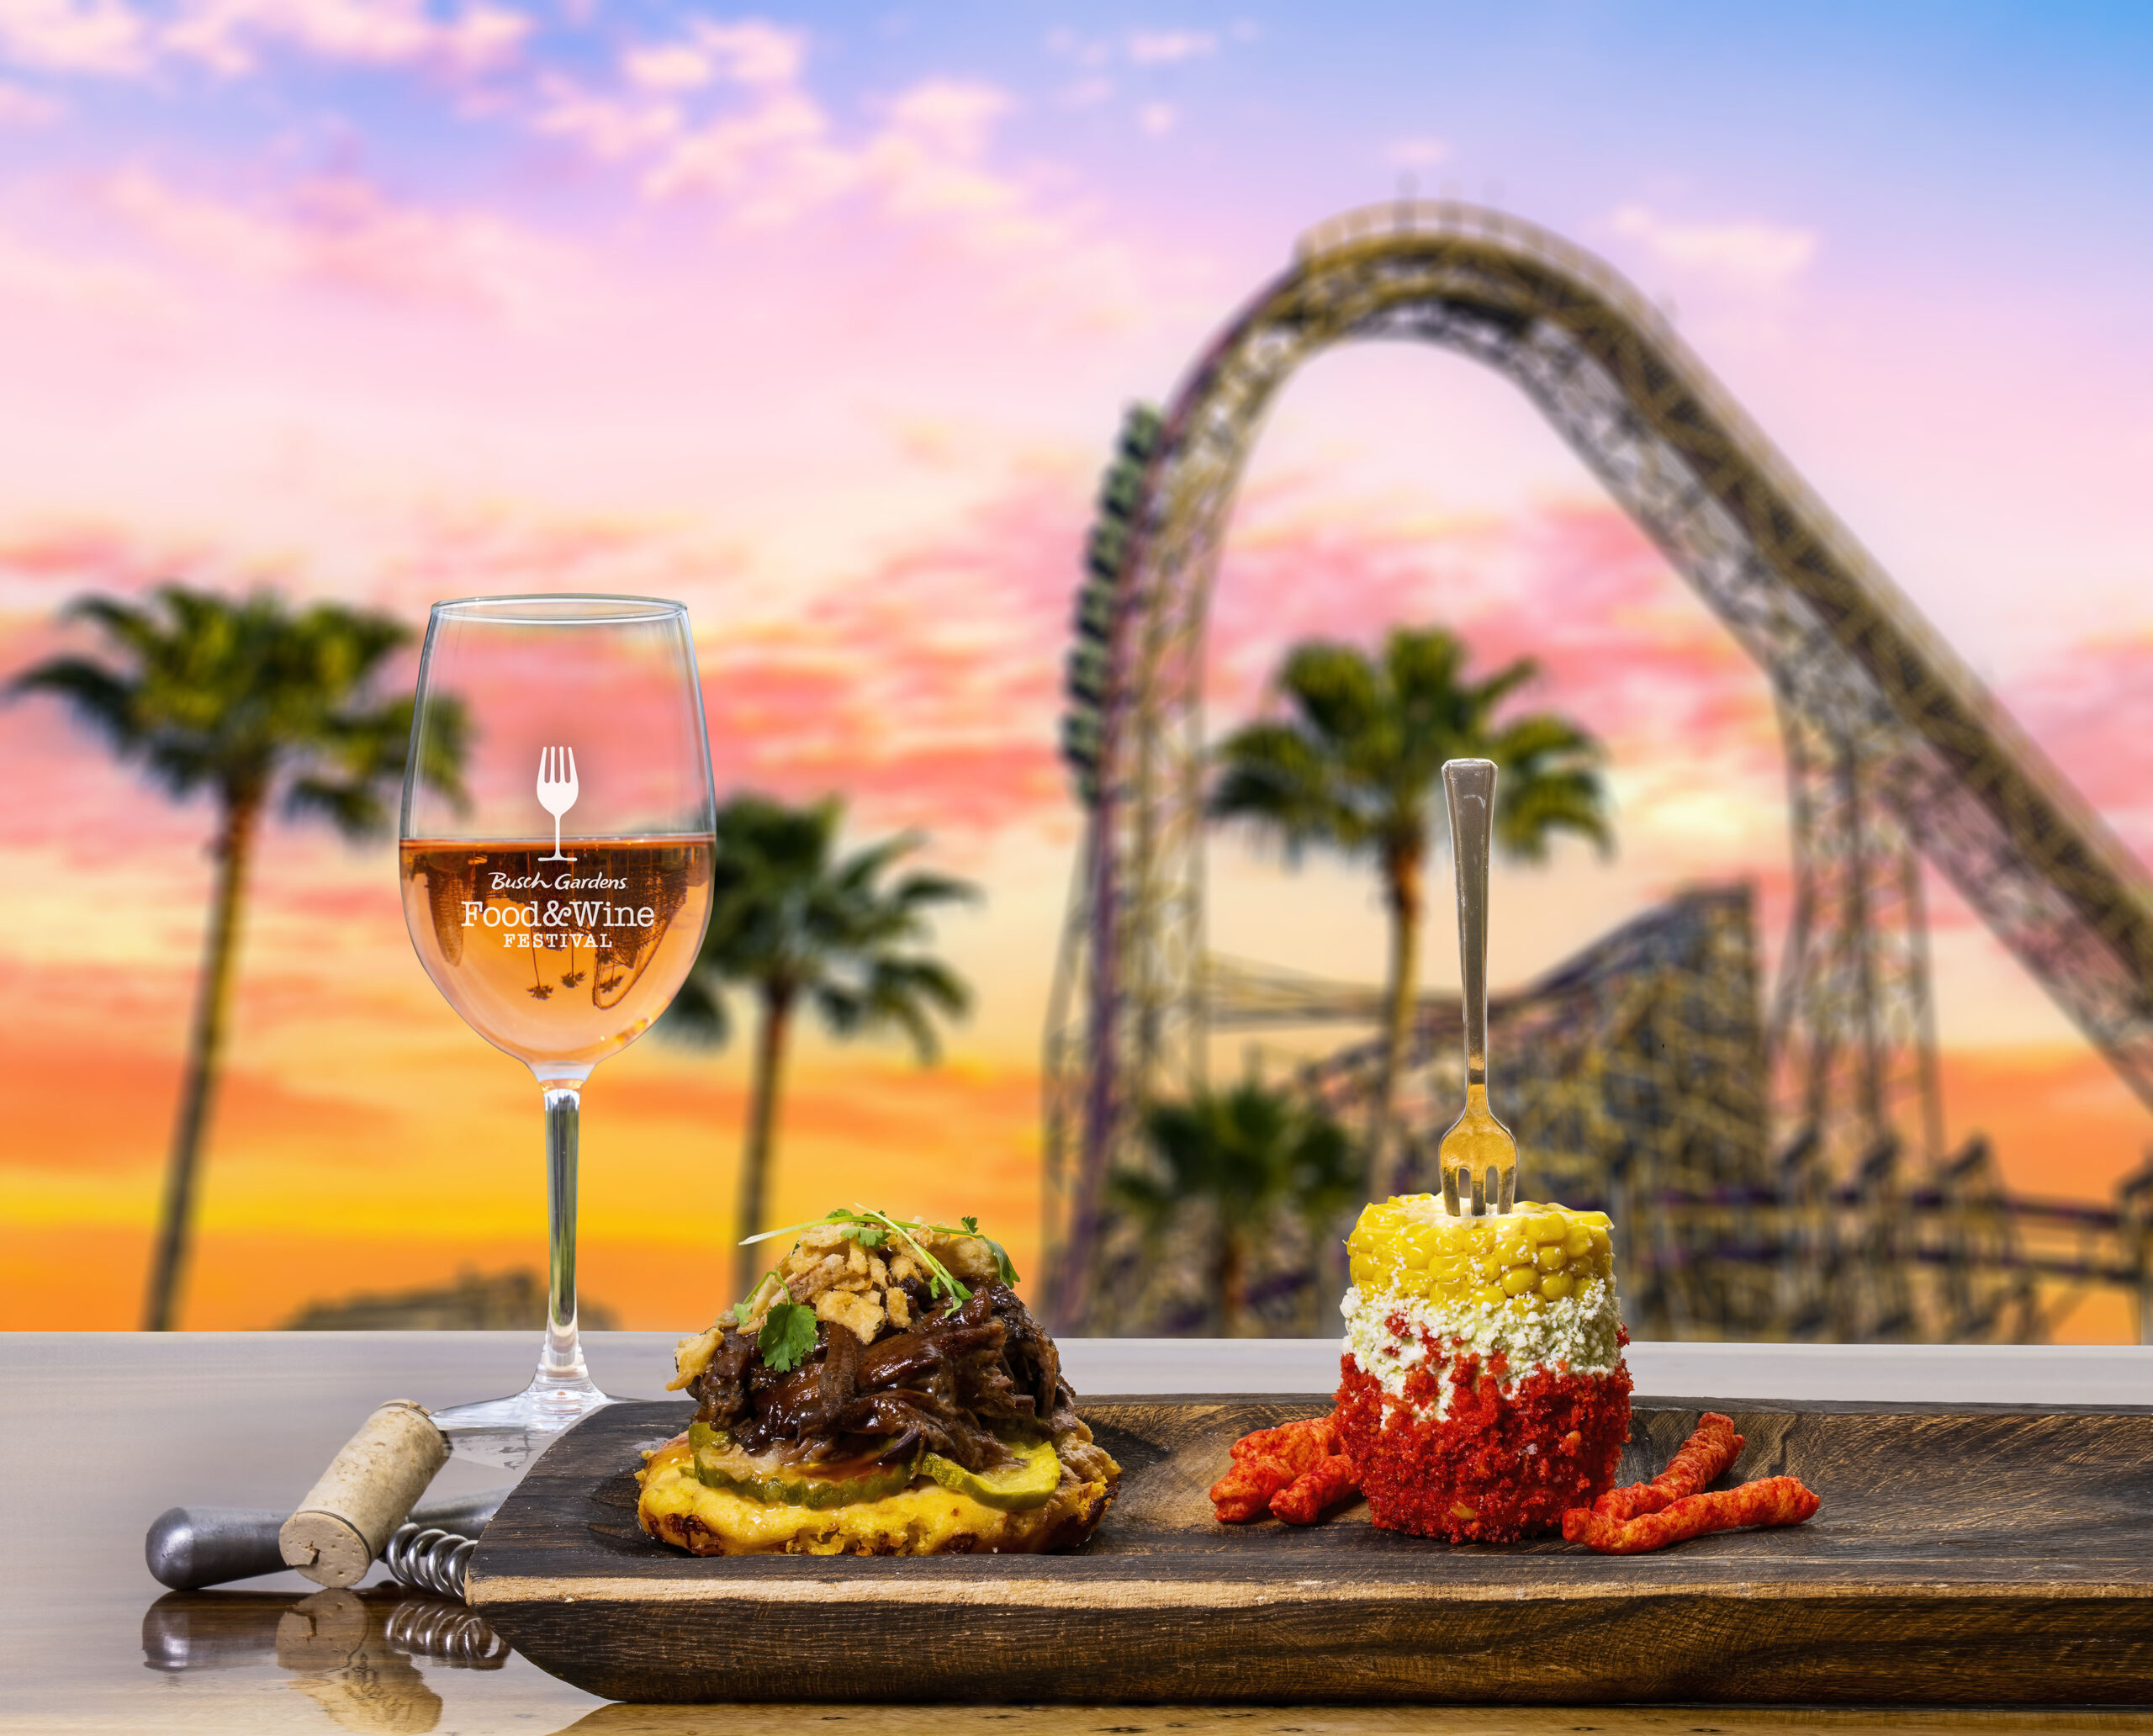 The Busch Gardens Food & Wine Festival returns on March 11 with festive